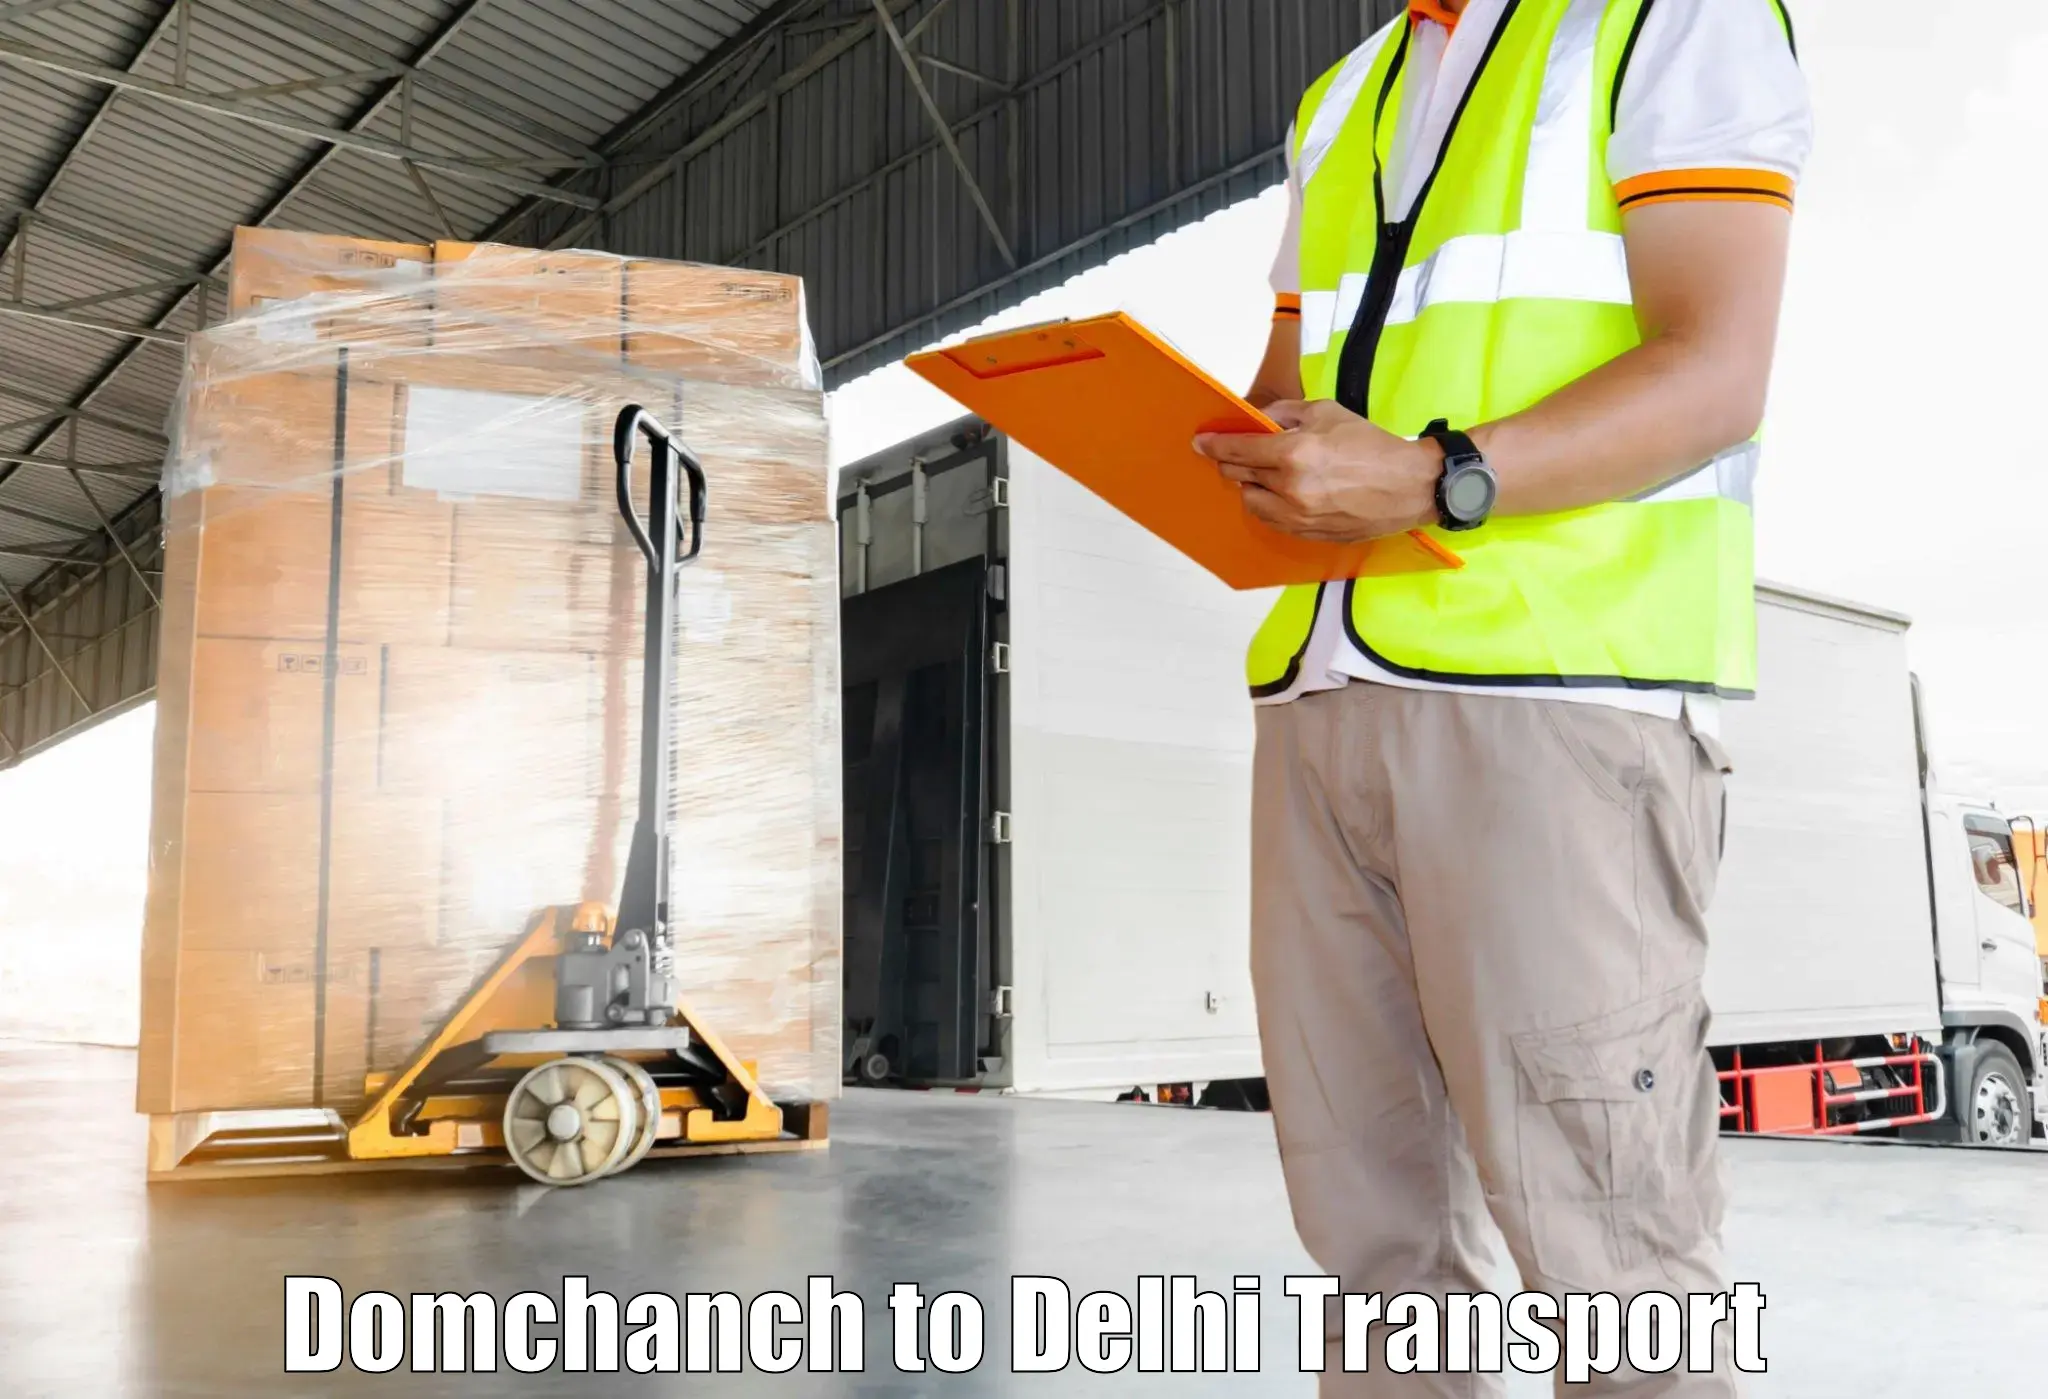 Online transport booking Domchanch to NCR